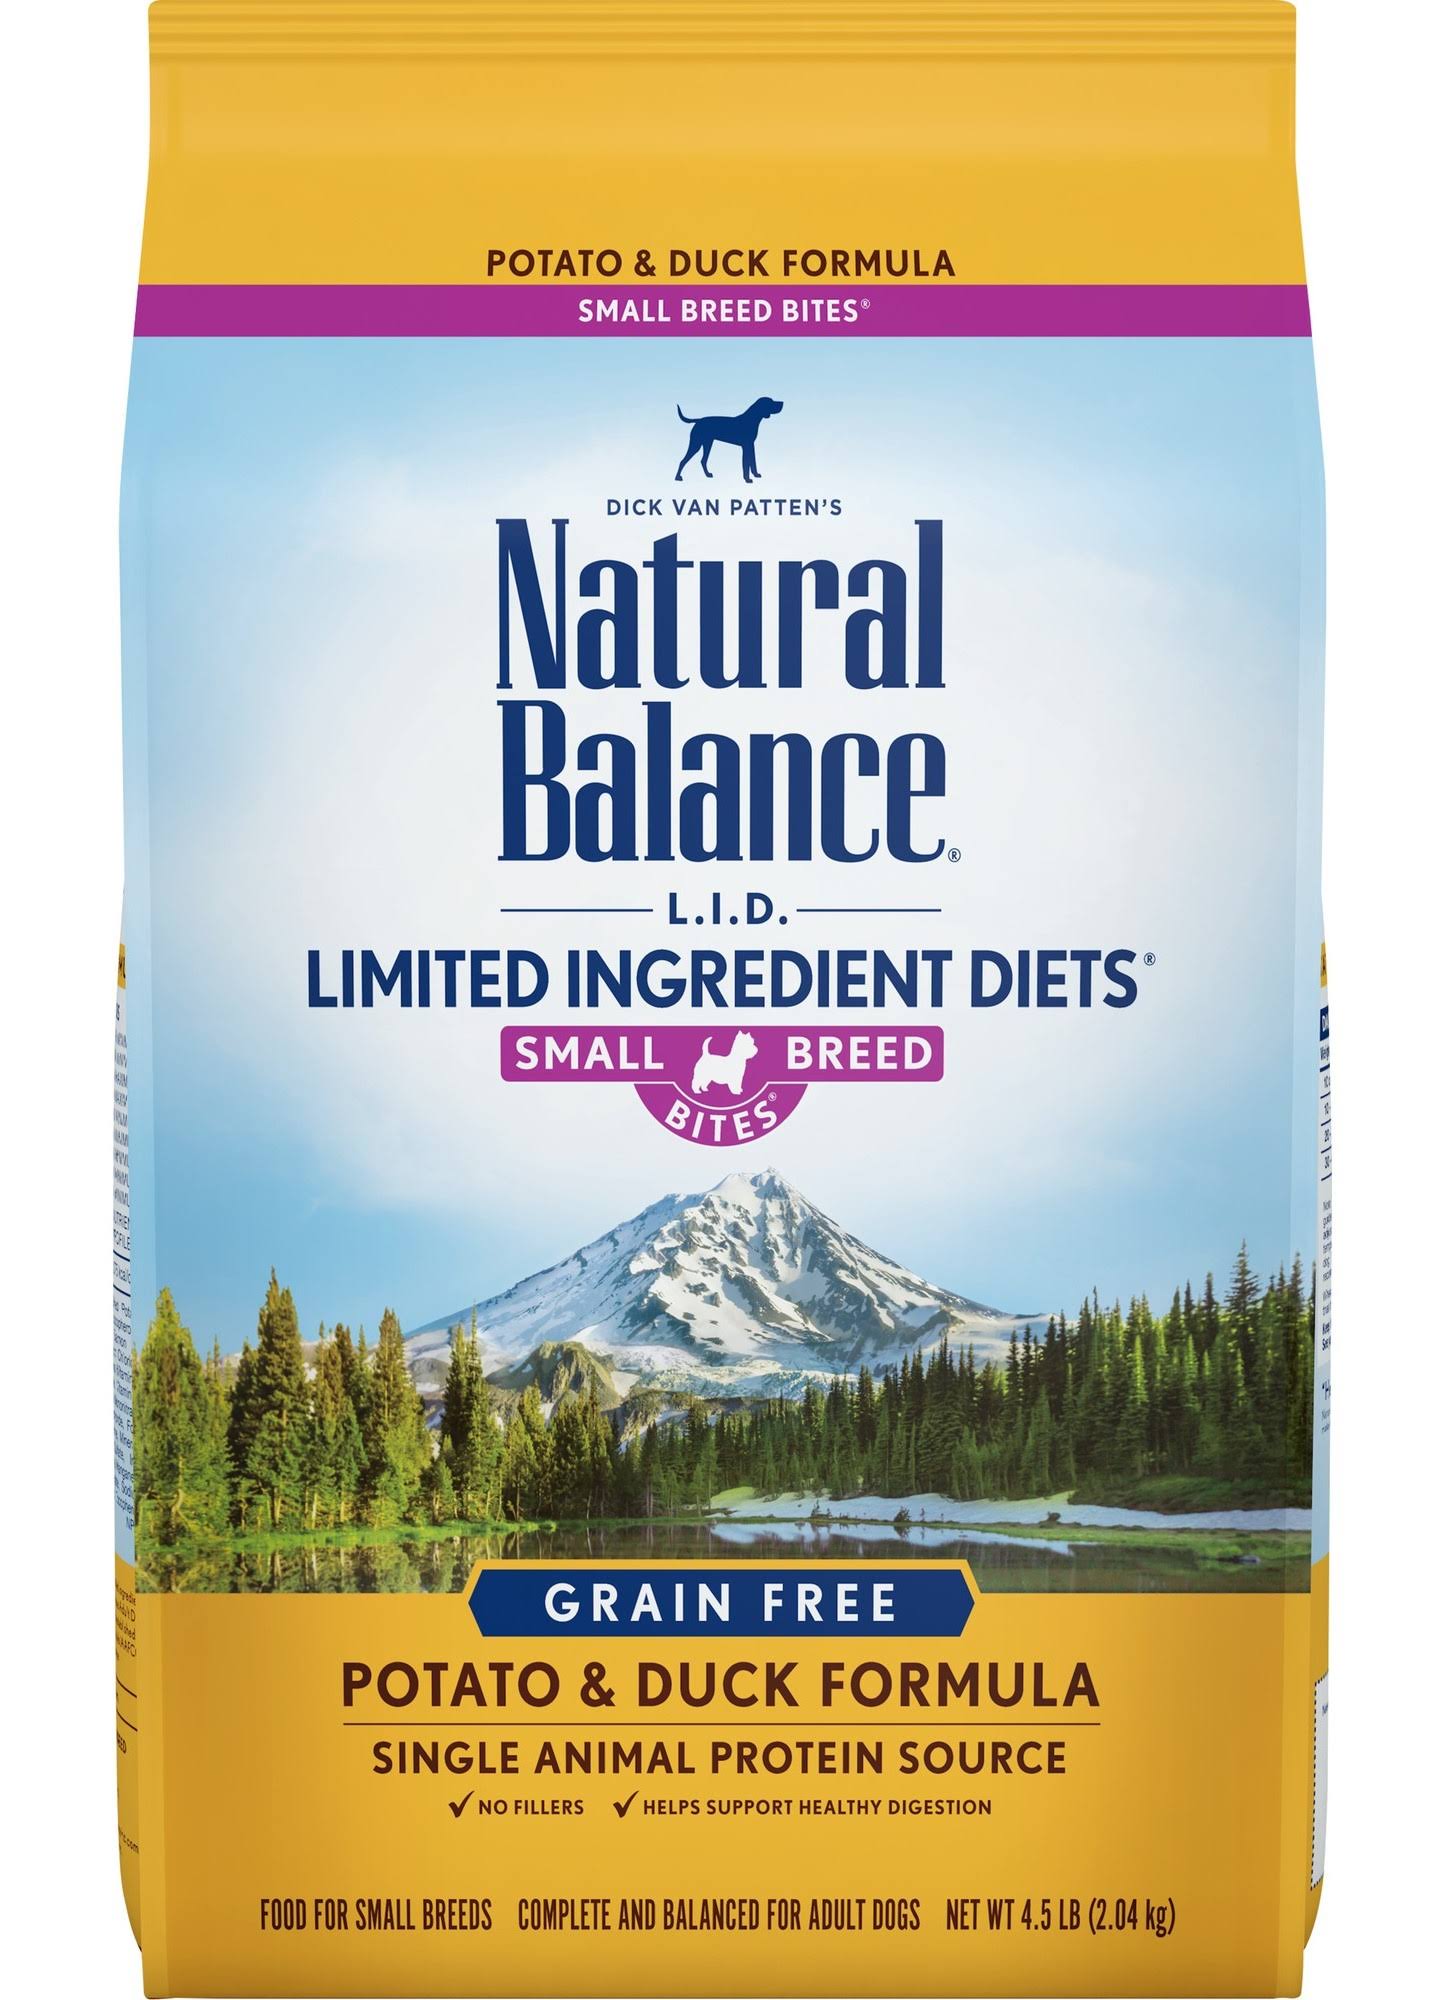 Natural Balance Limited Ingredients Diets Small Breed Bites Dog Food, Grain Free, Duck & Potato Formula - 4 lb